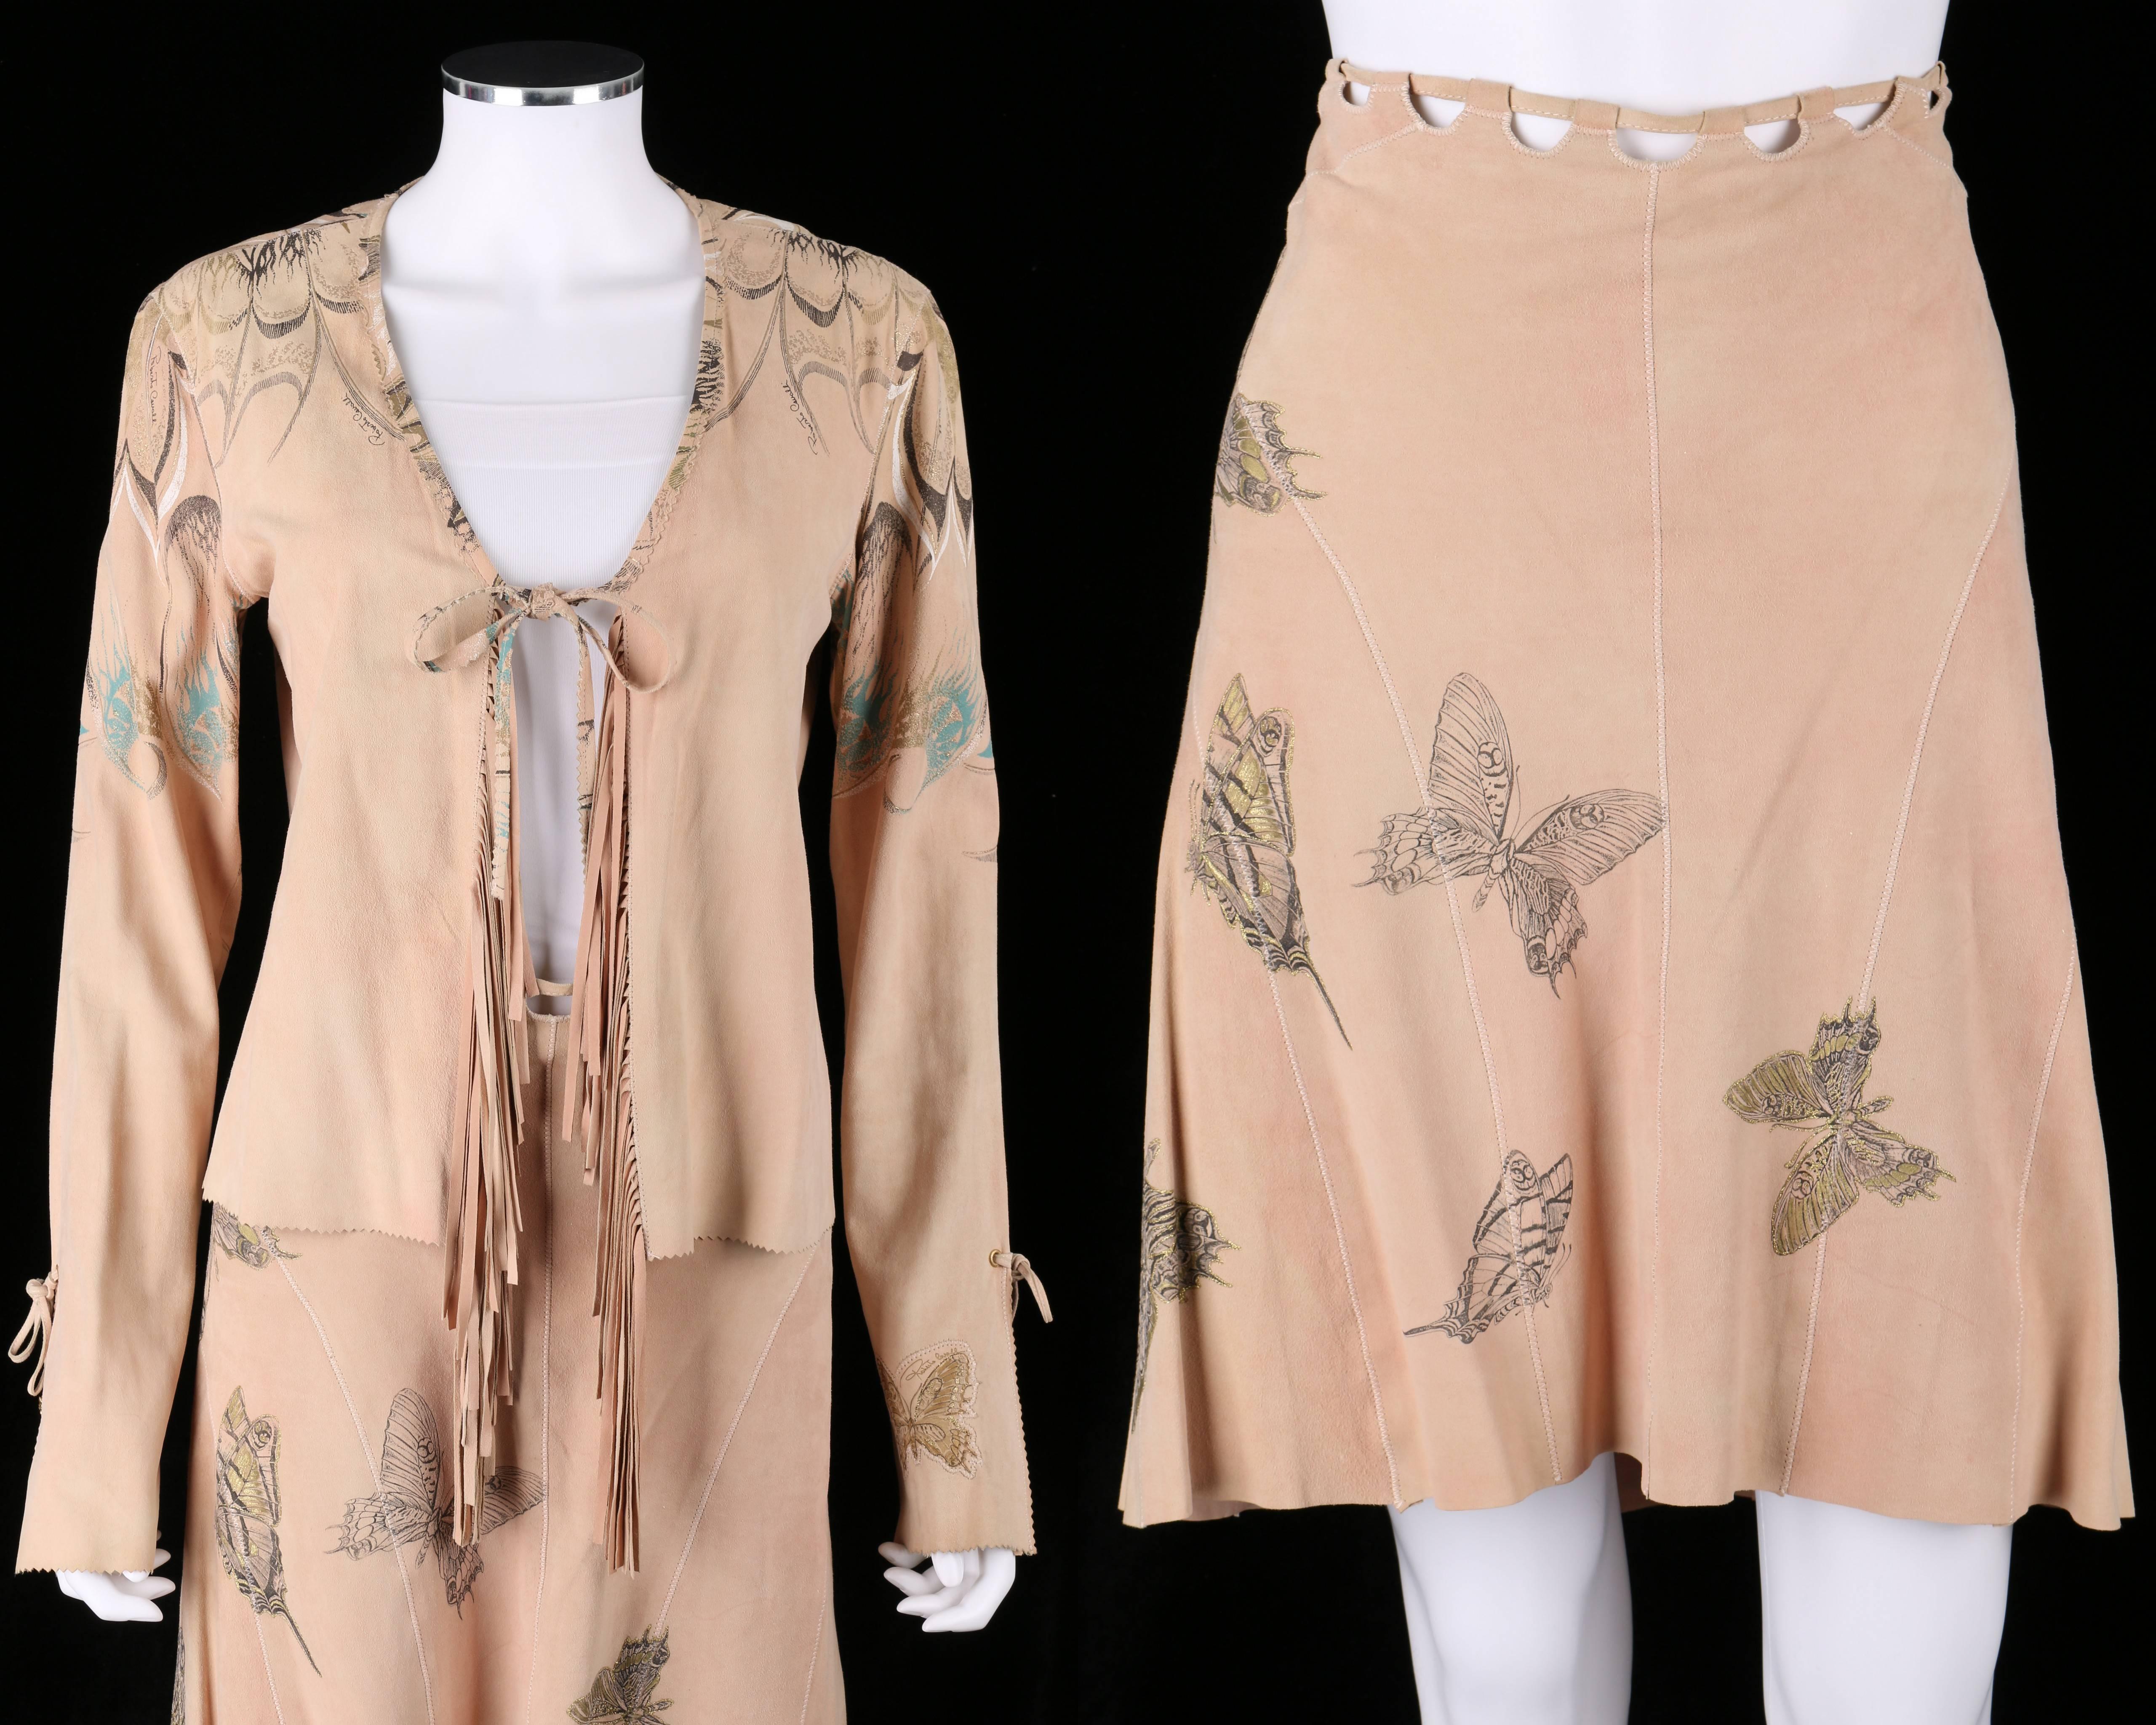 Roberto Cavalli two piece genuine suede leather skirt and top/jacket set. Multi-color embossed butterfly embellishment. Jacket as an open front with fringe detail. Skirt has a cutout drawstring waist that ties at back. Top stitch detail. Hidden zip